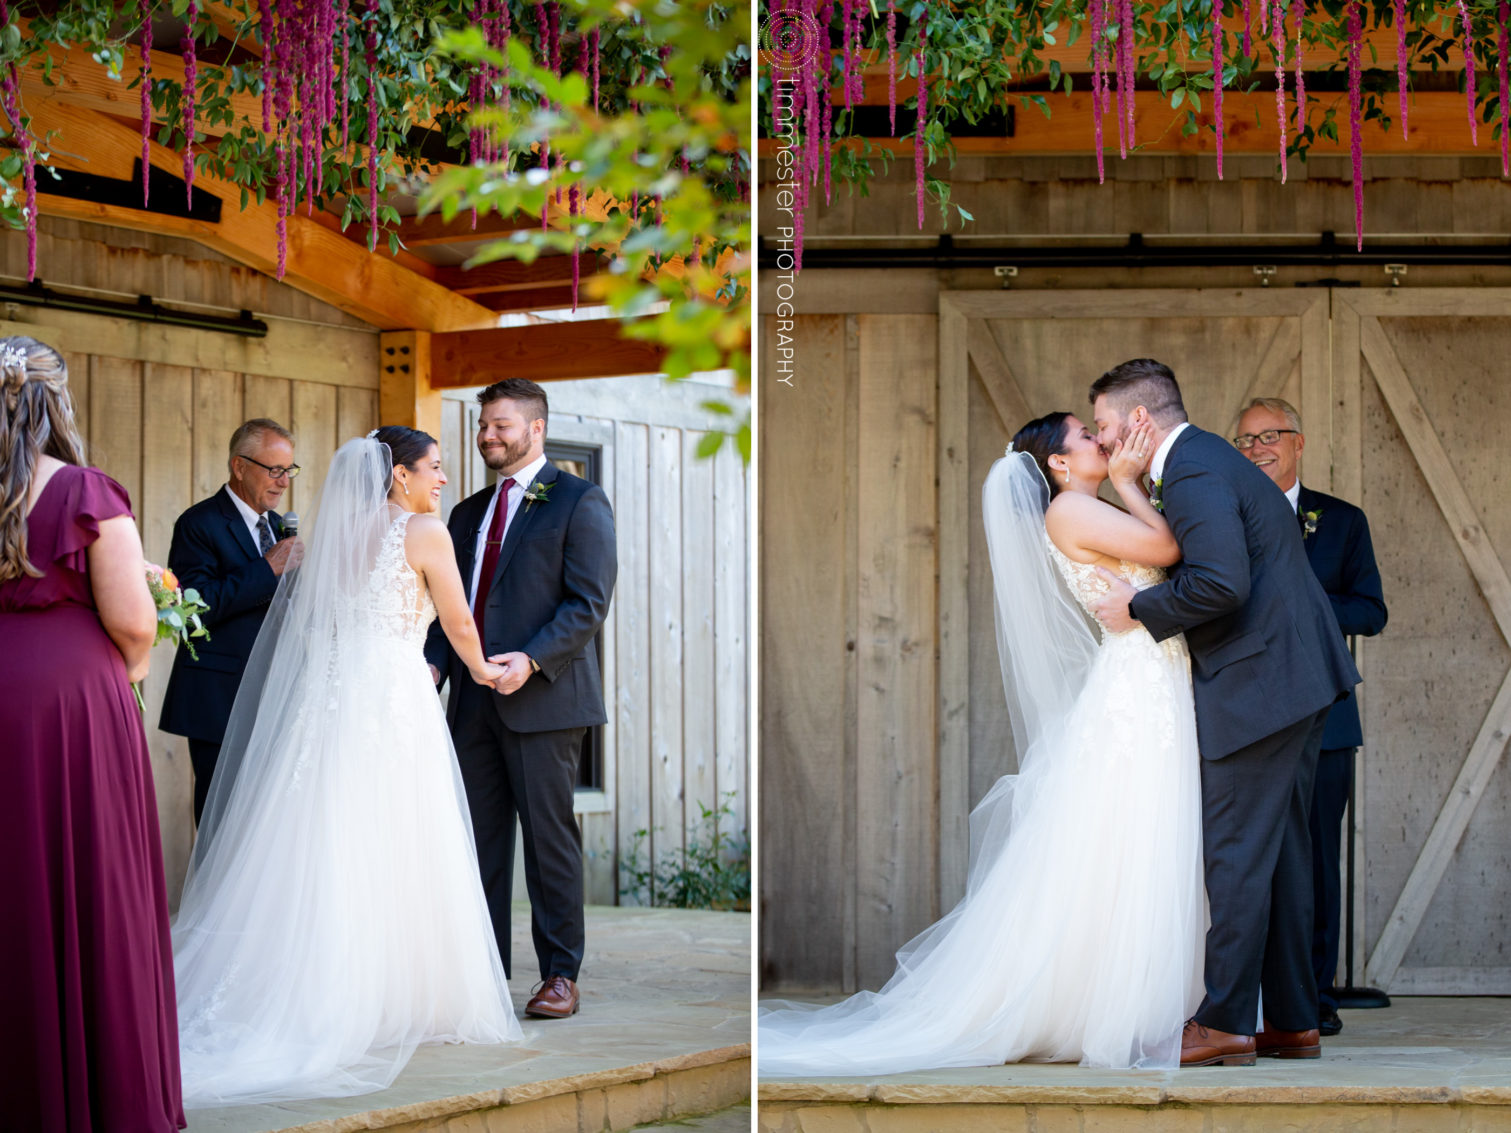 A Rivers and Bridges wedding at Dorsett House with an outdoor ceremony in the fall